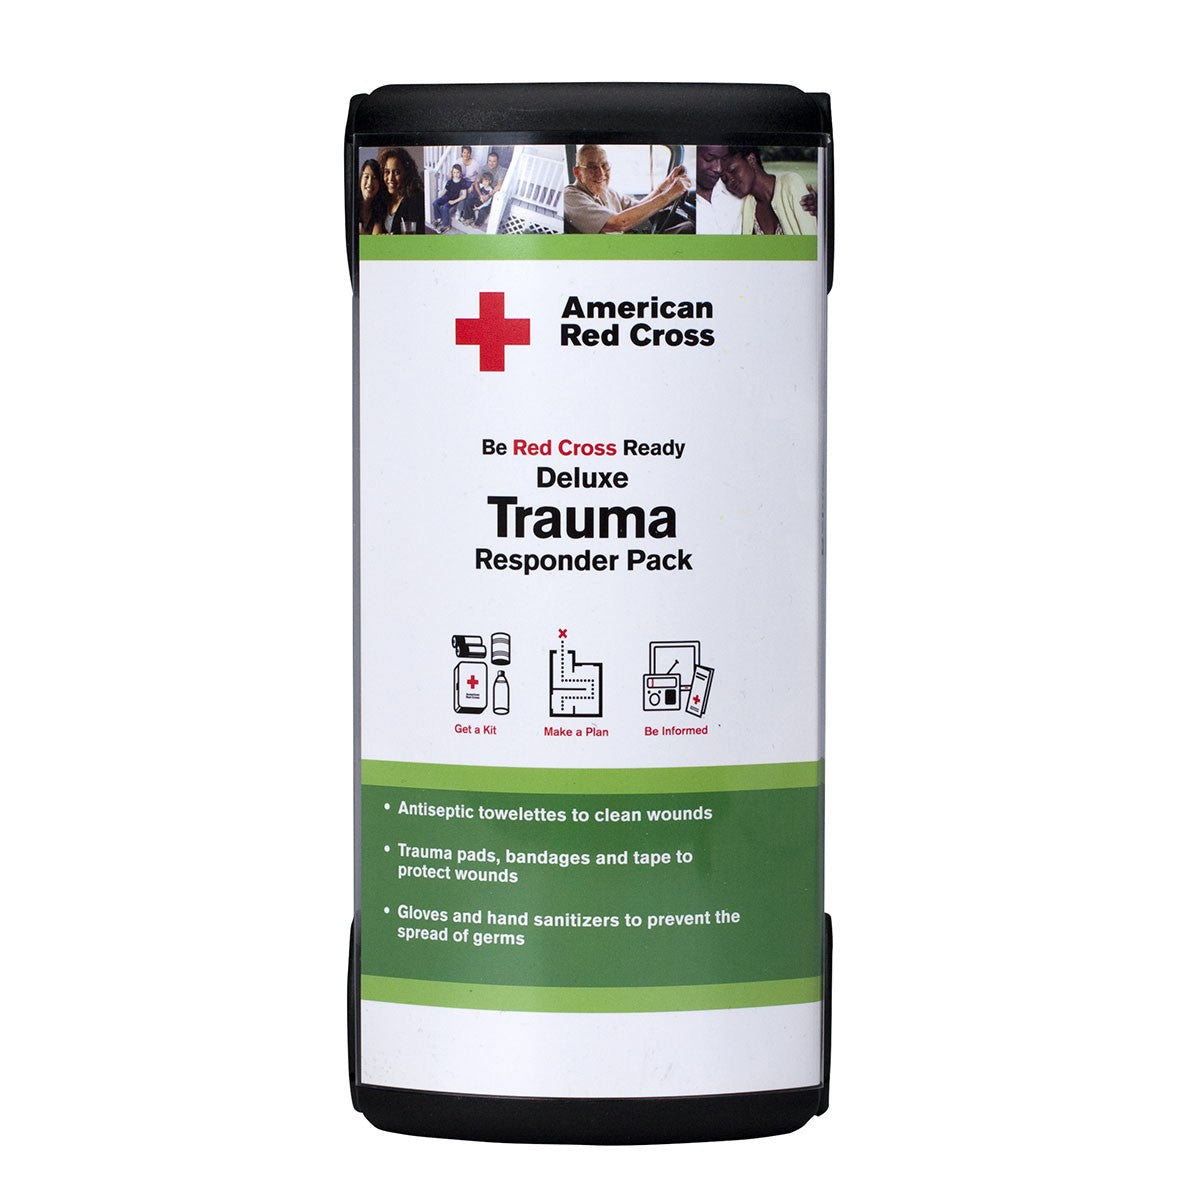 American Red Cross Deluxe Trauma Responder Pack By First Aid Only - BS-FAK-RC-645-1-FM